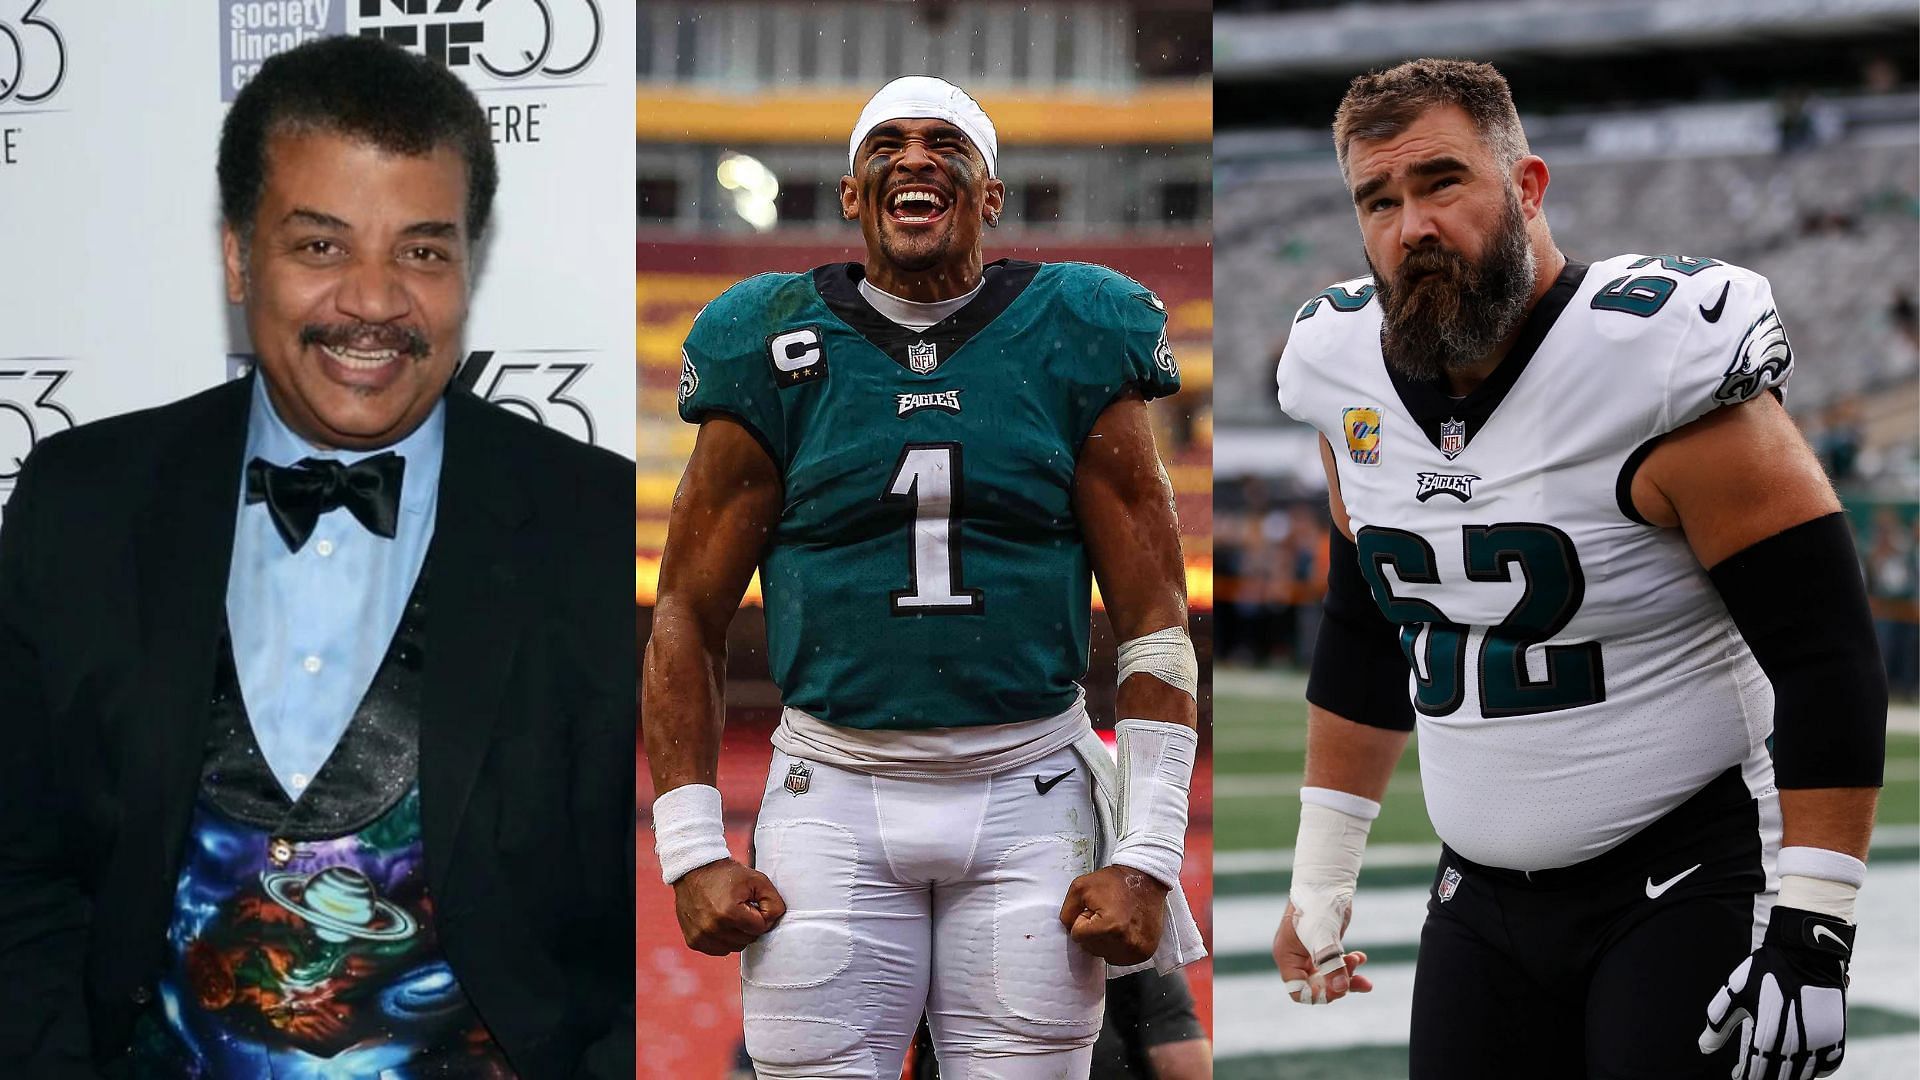 Dr. Neil deGrasse Tyson comes up with real reason behind Eagles&rsquo; &lsquo;brotherly shove&rsquo; move&rsquo;s massive success